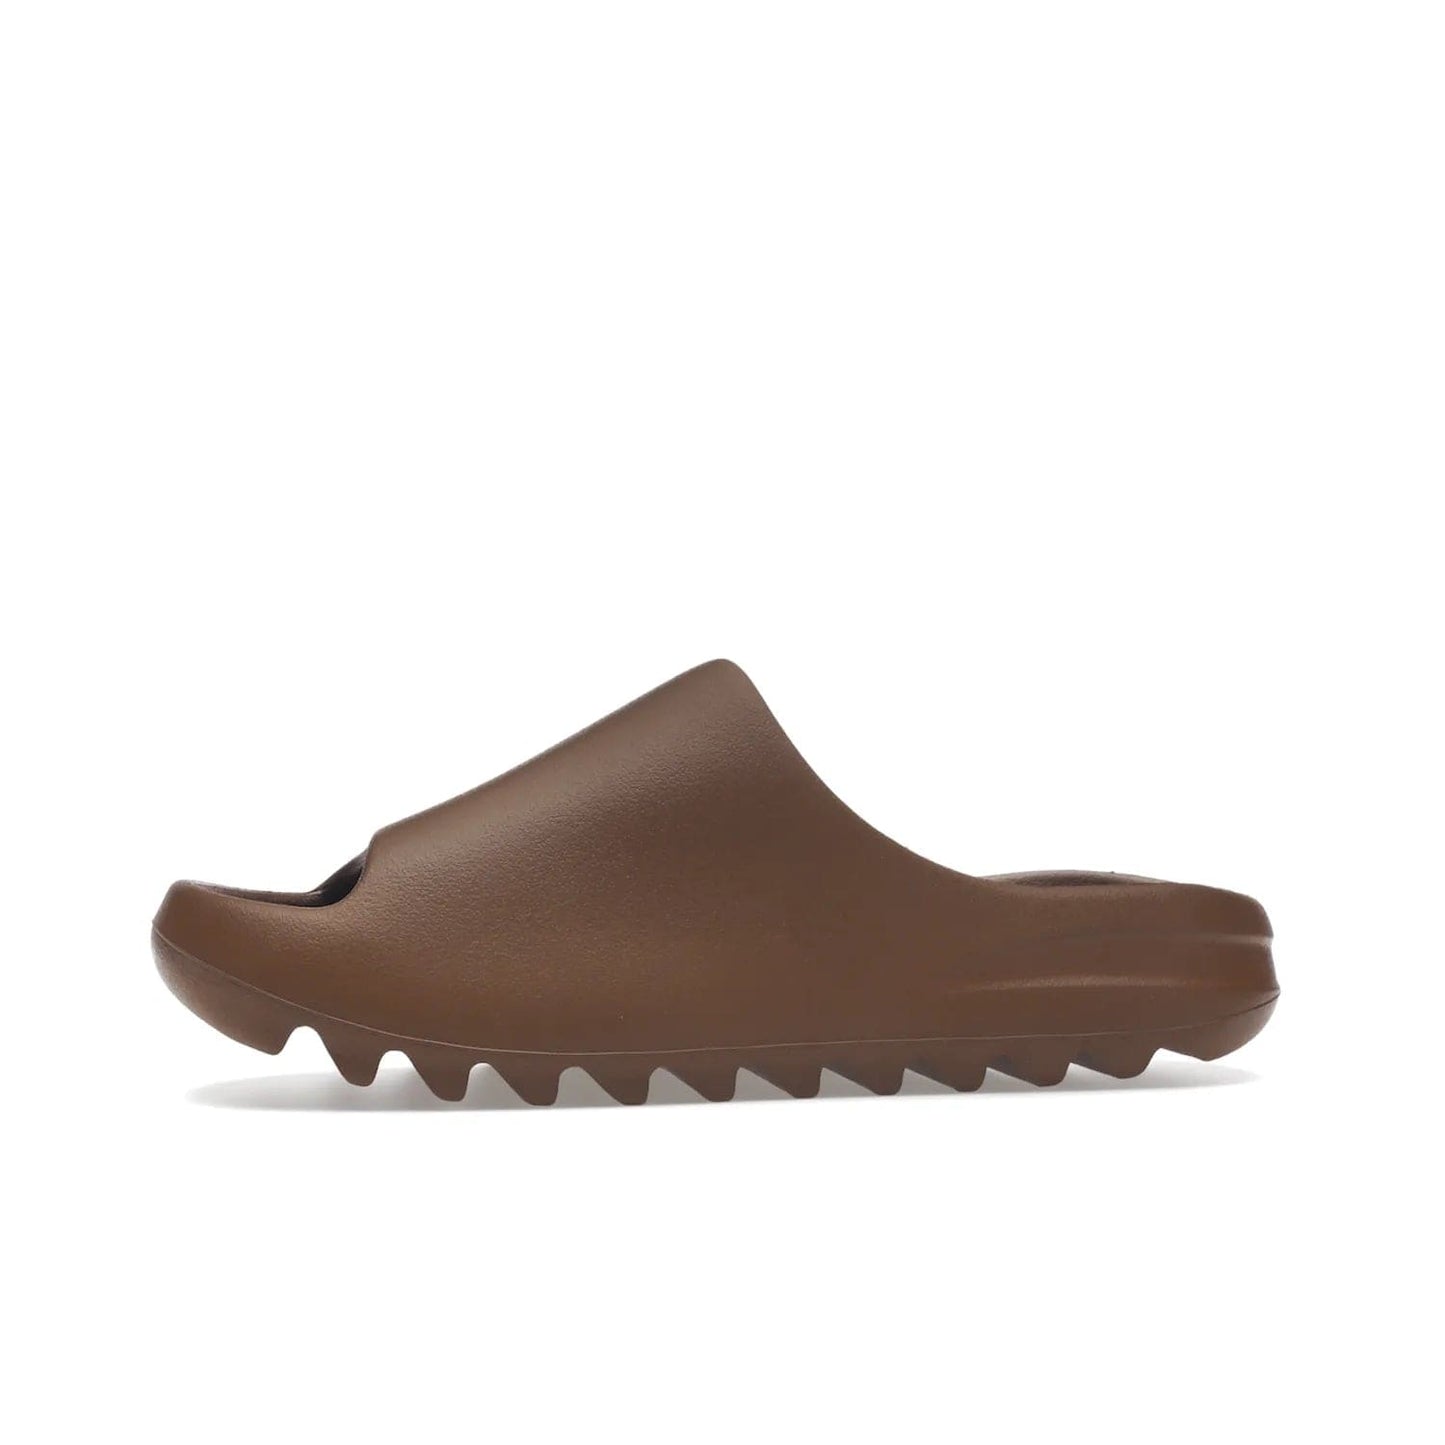 adidas Yeezy Slide Flax - Image 18 - Only at www.BallersClubKickz.com - Score the perfect casual look with the adidas Yeezy Slide Flax. Made with lightweight injected EVA plus horizontal grooves underfoot for traction. Release on August 22, 2022. $70.